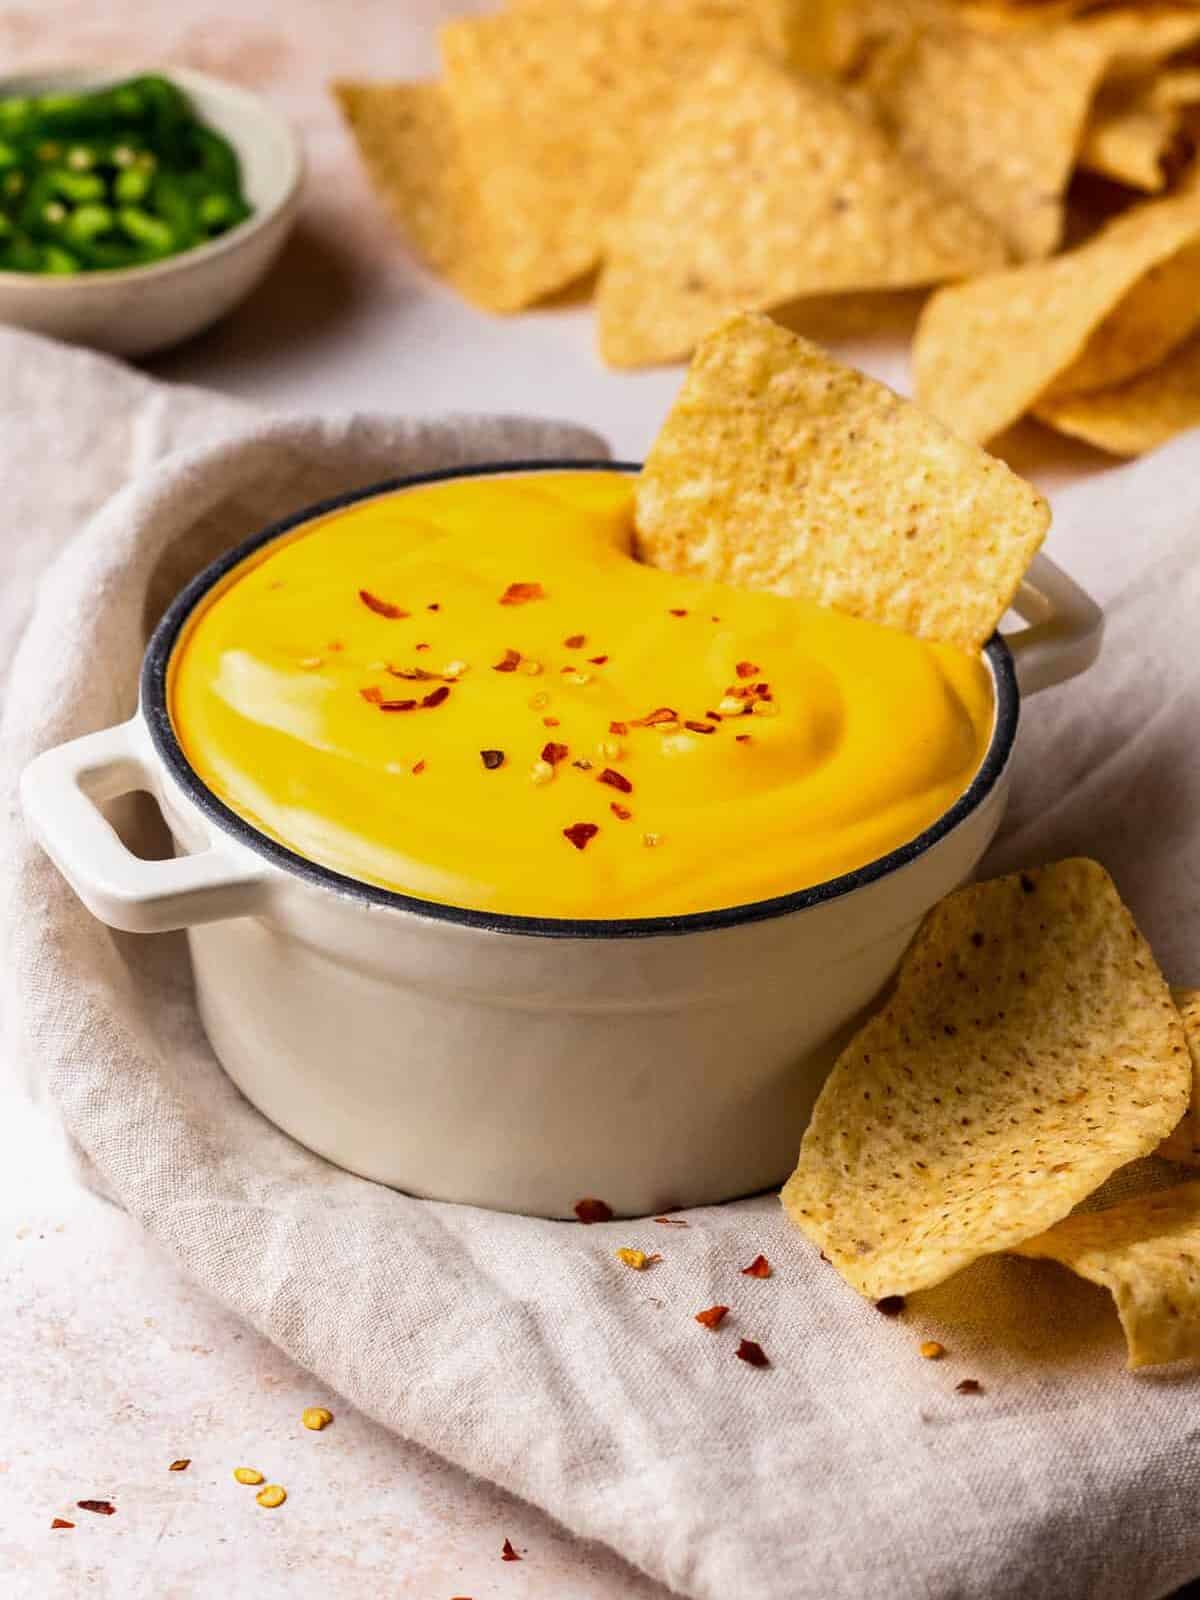 bowl of nacho cheese sauce with tortilla chips dipped in it